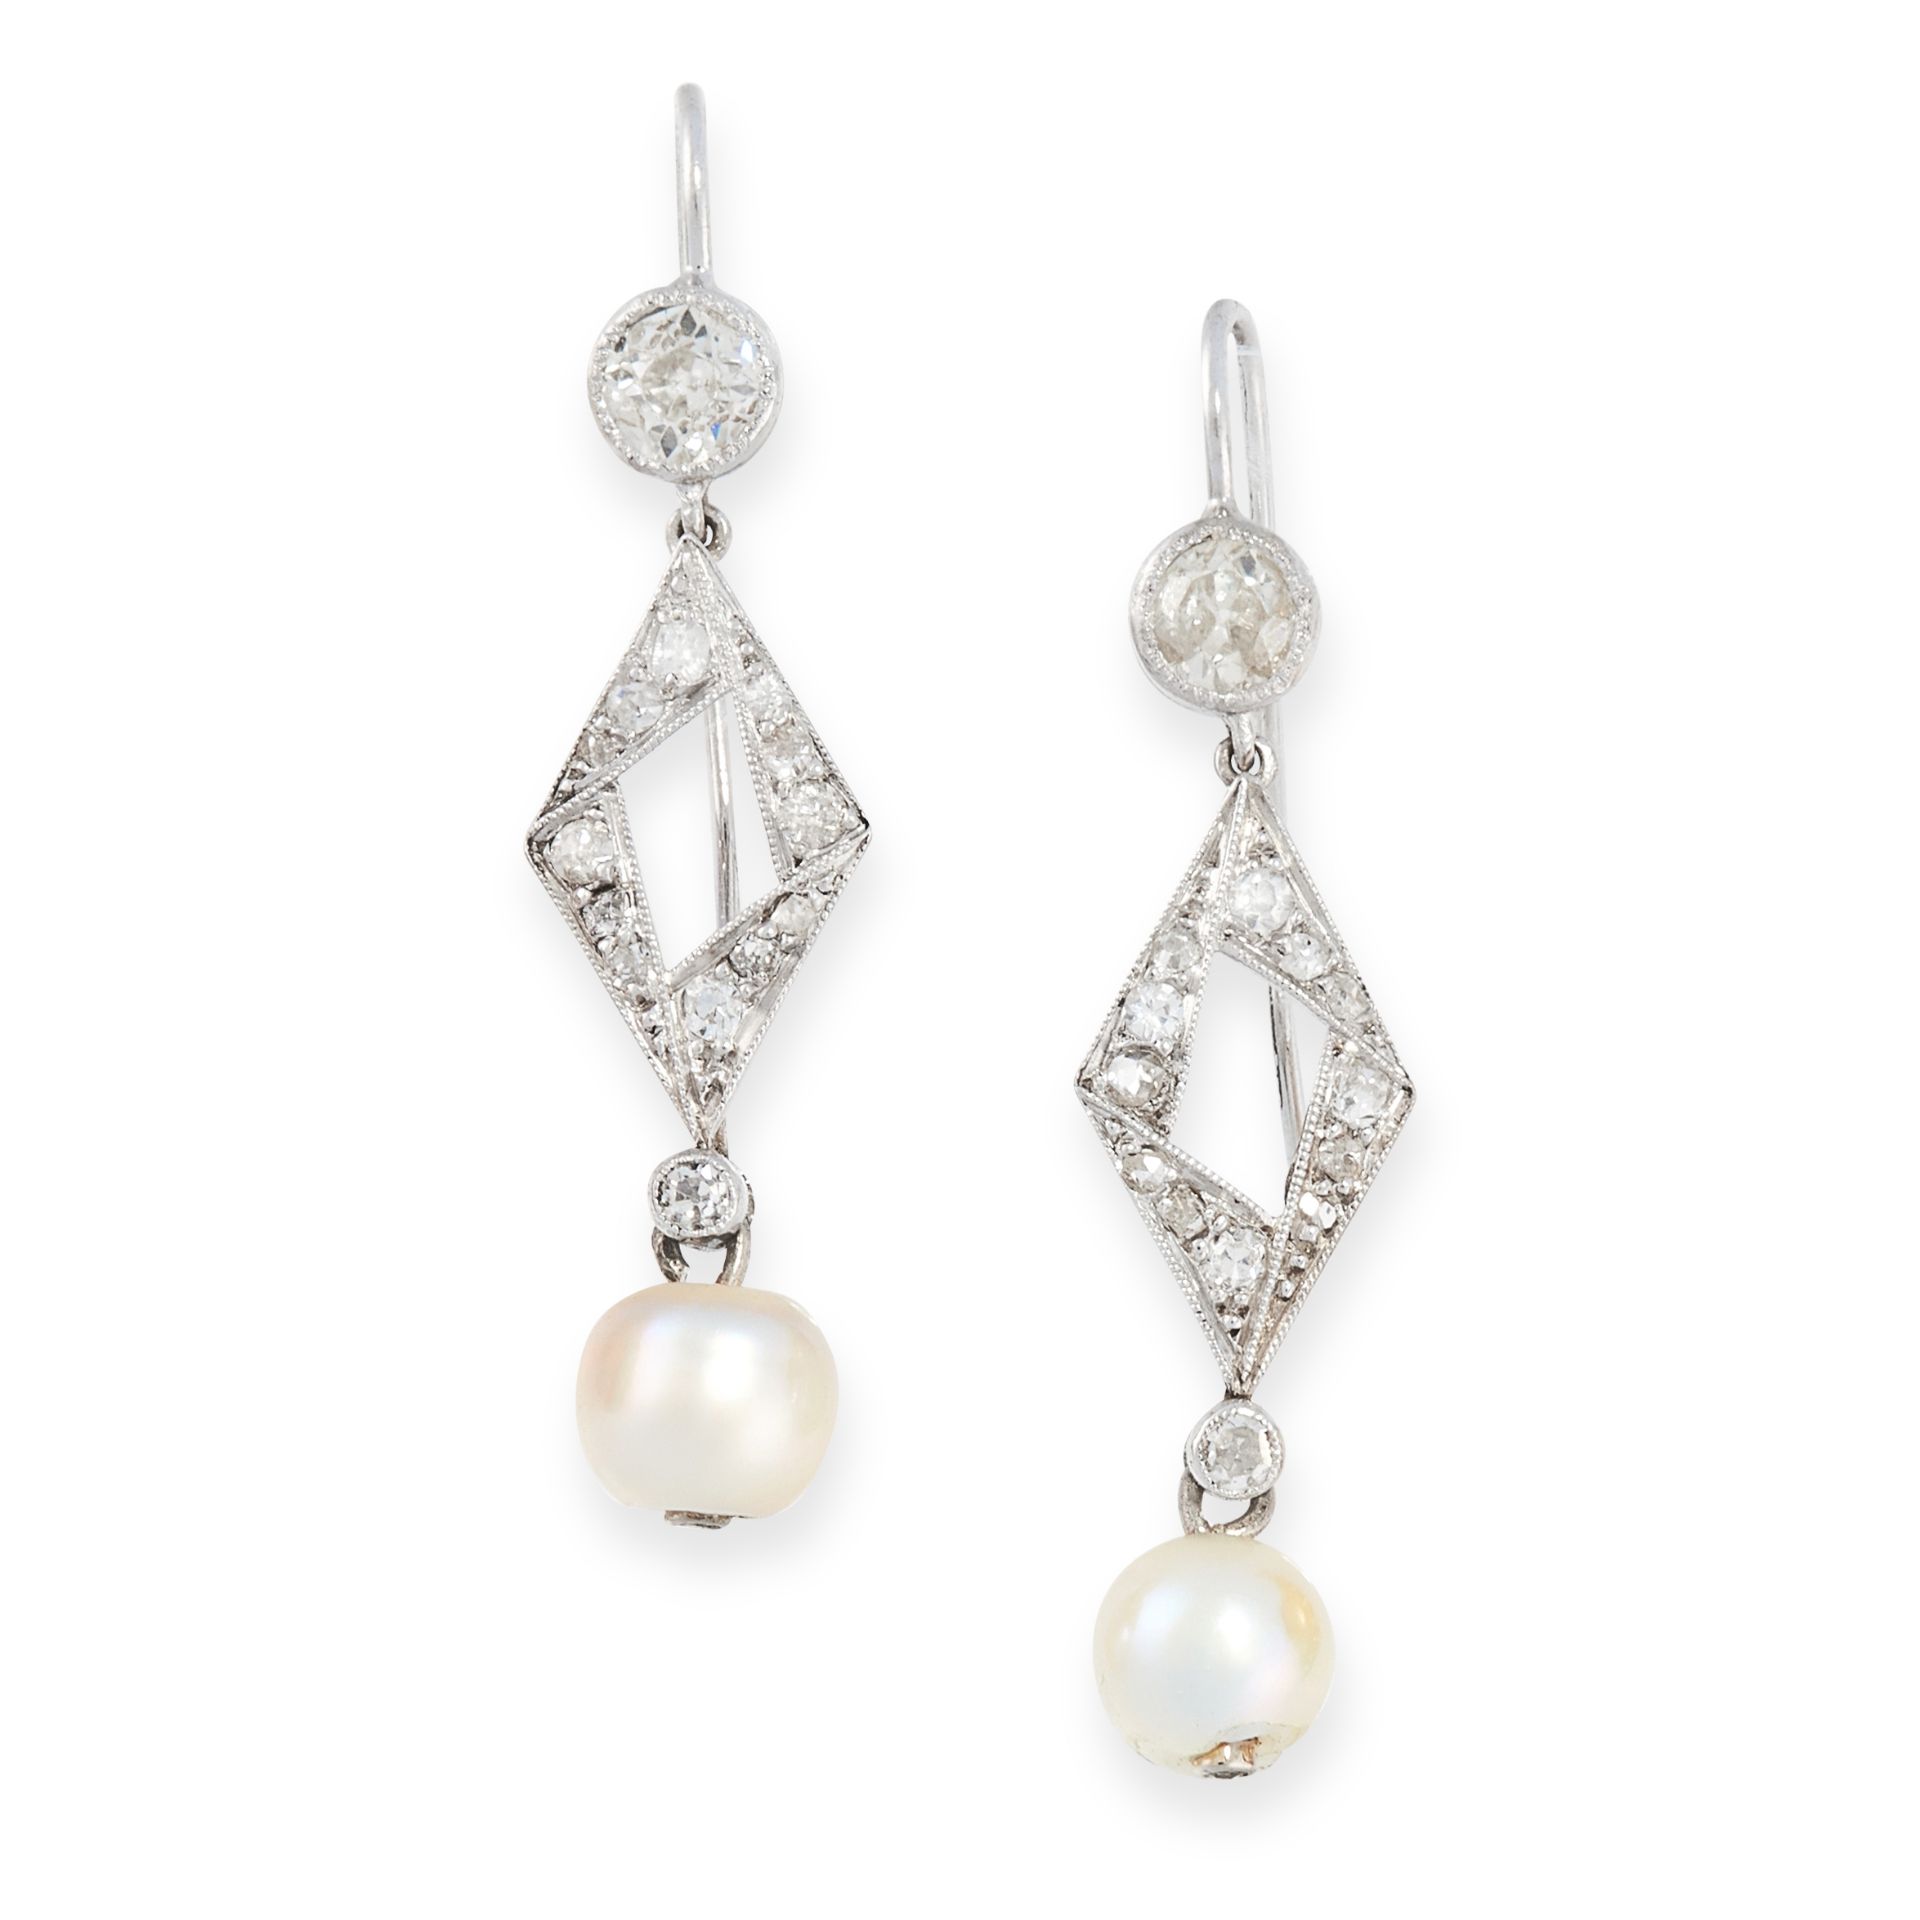 A PAIR OF PEARL AND DIAMOND EARRINGS, the geometric bodies set with old and single cut diamonds,